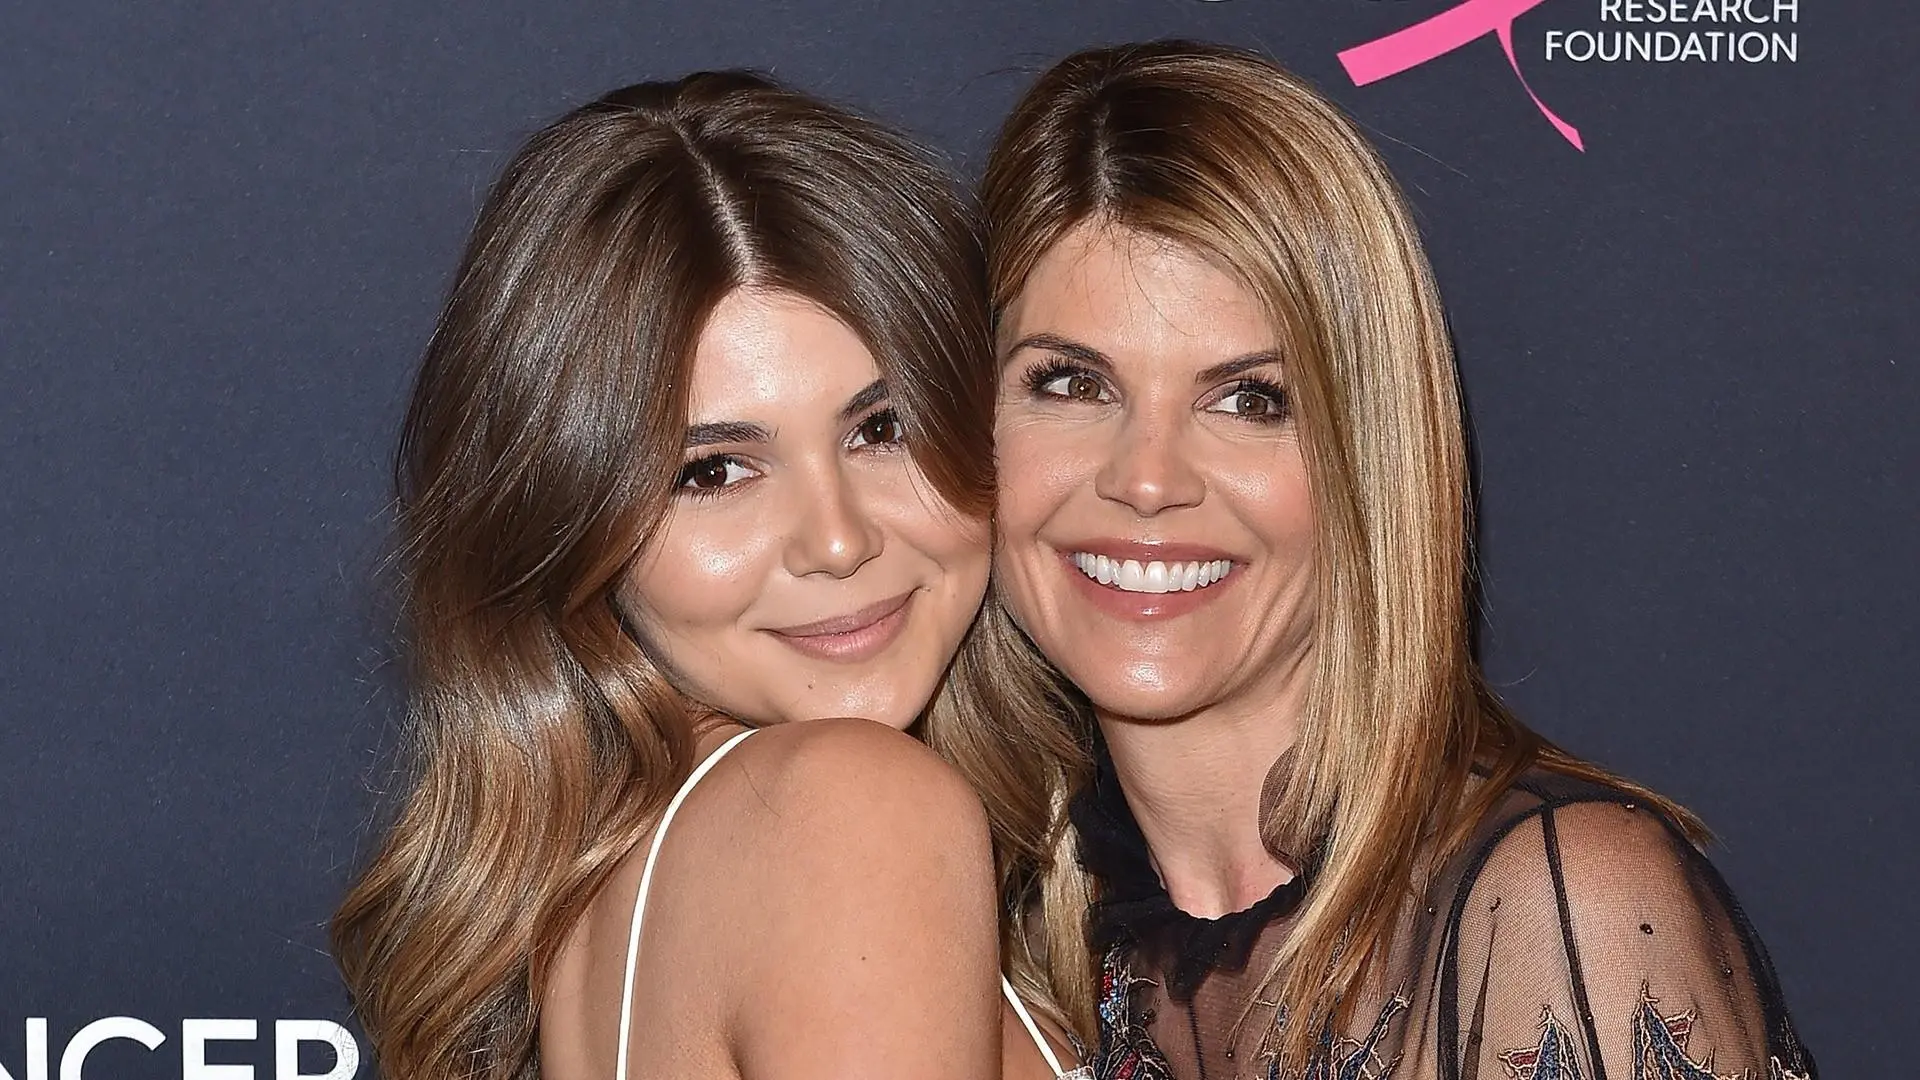 show hewlett packard ad with lori loughlin's daughter - Did Olivia Jade get kicked out of USC